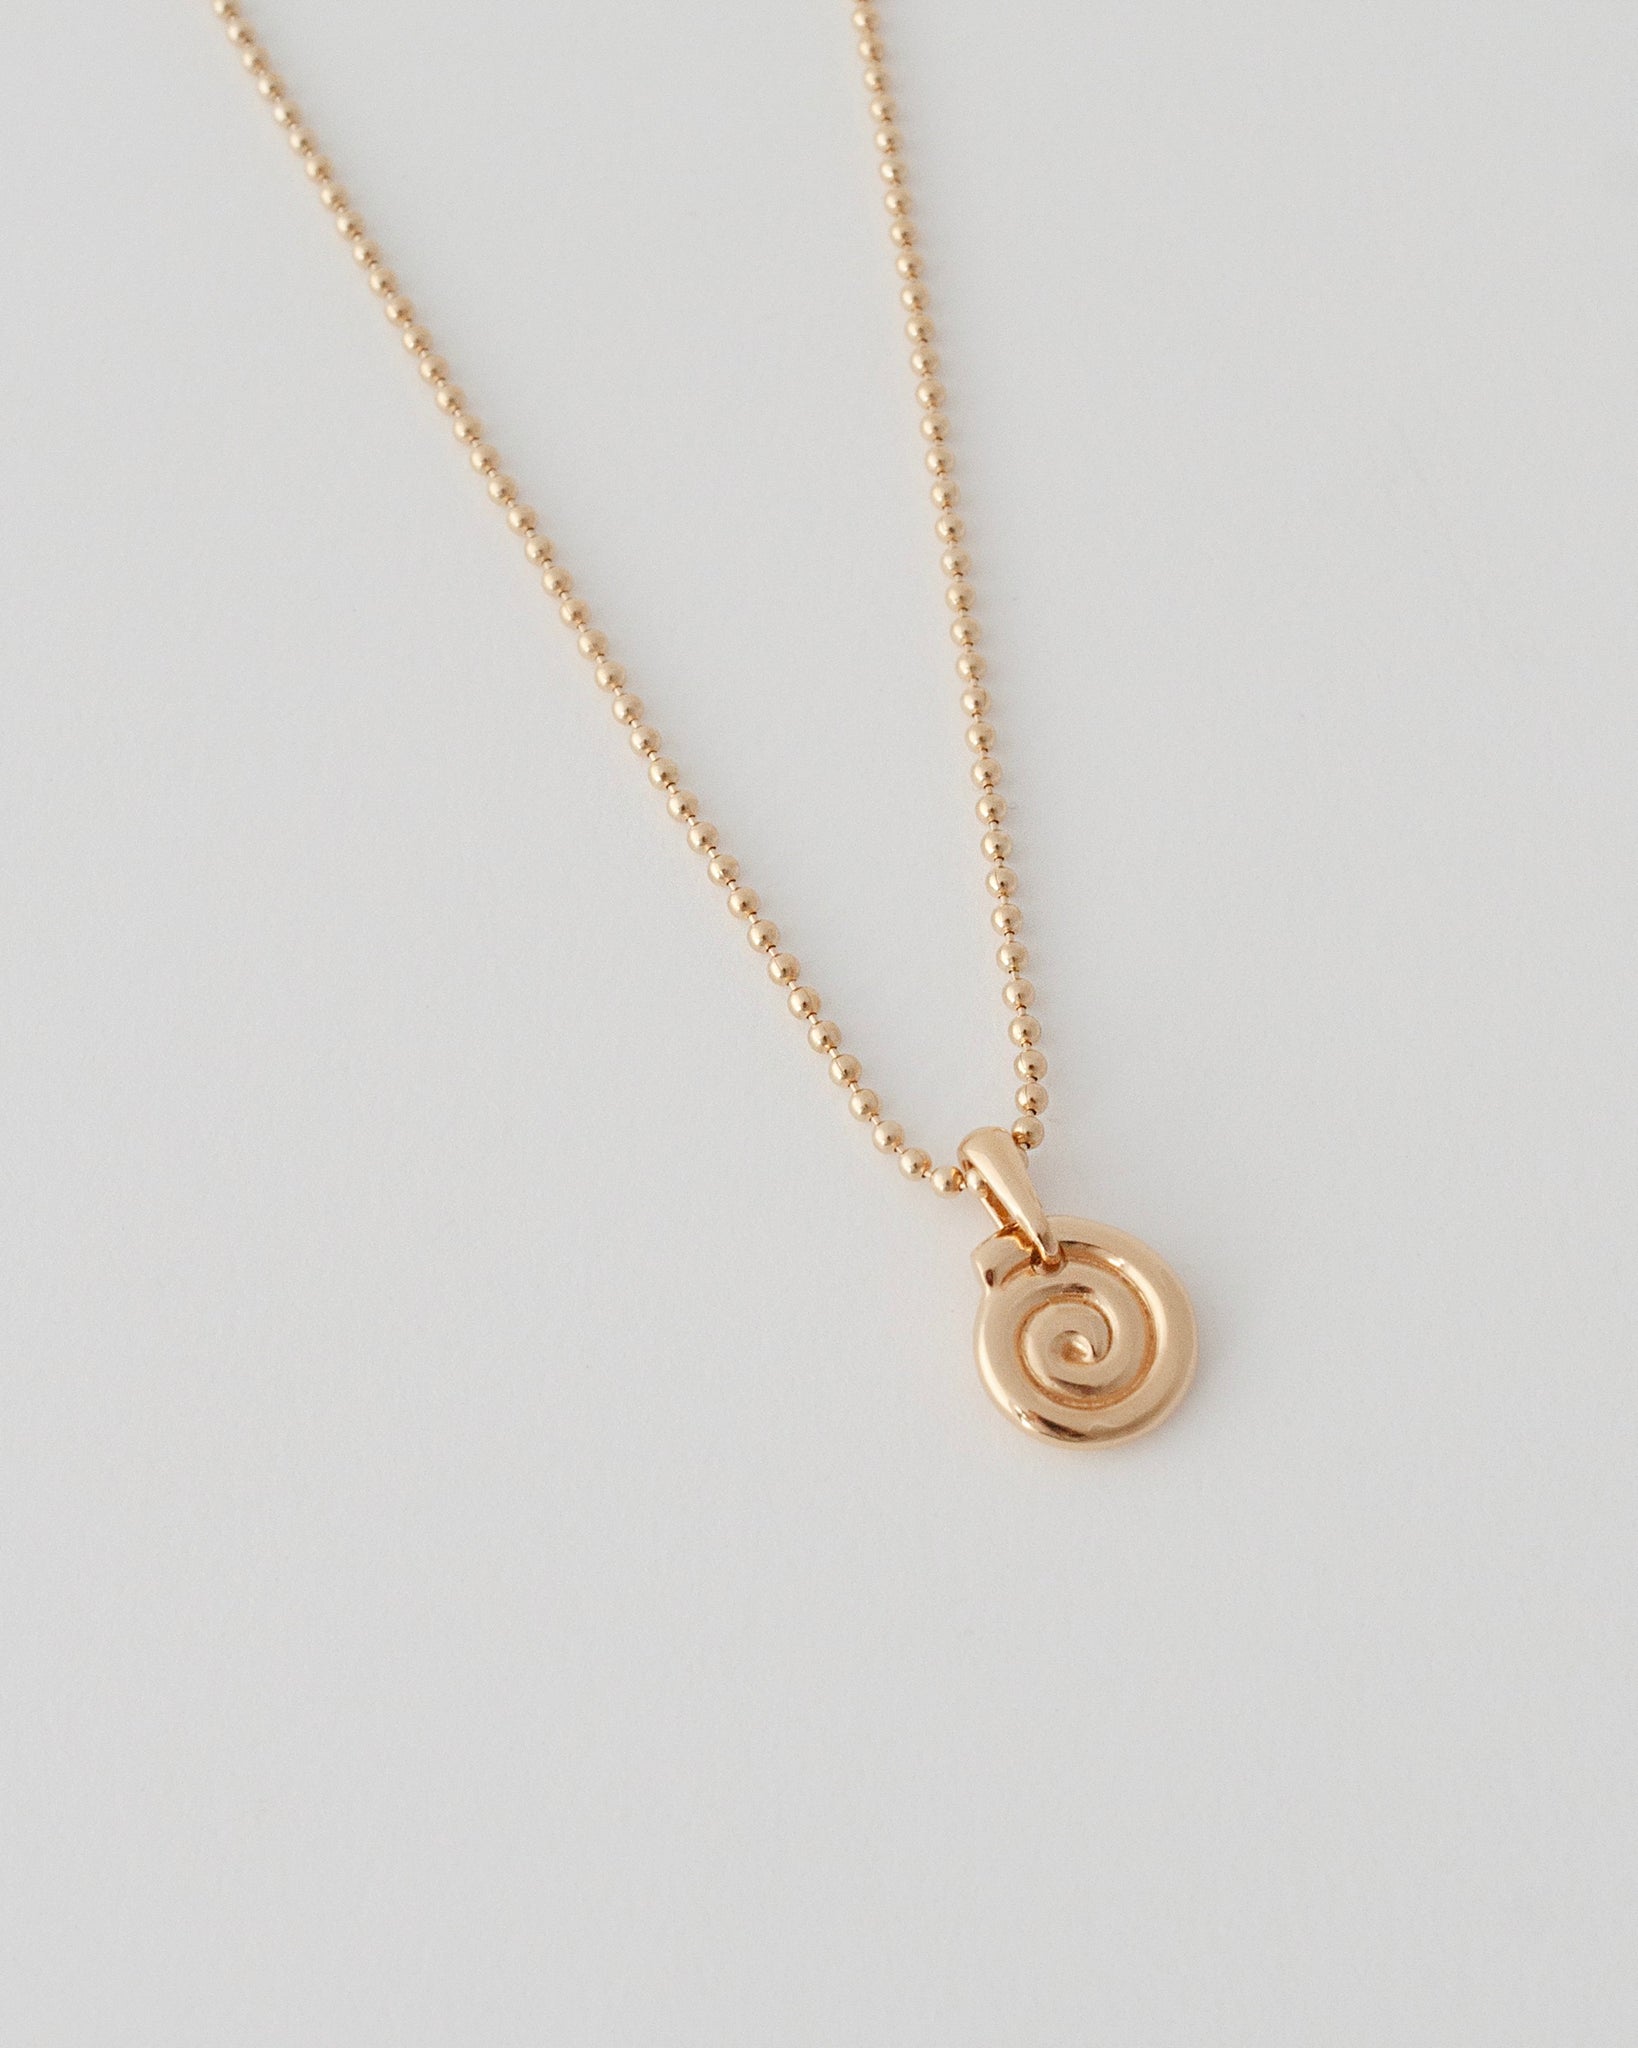 EXISTENTIAL SWIRL NECKLACE